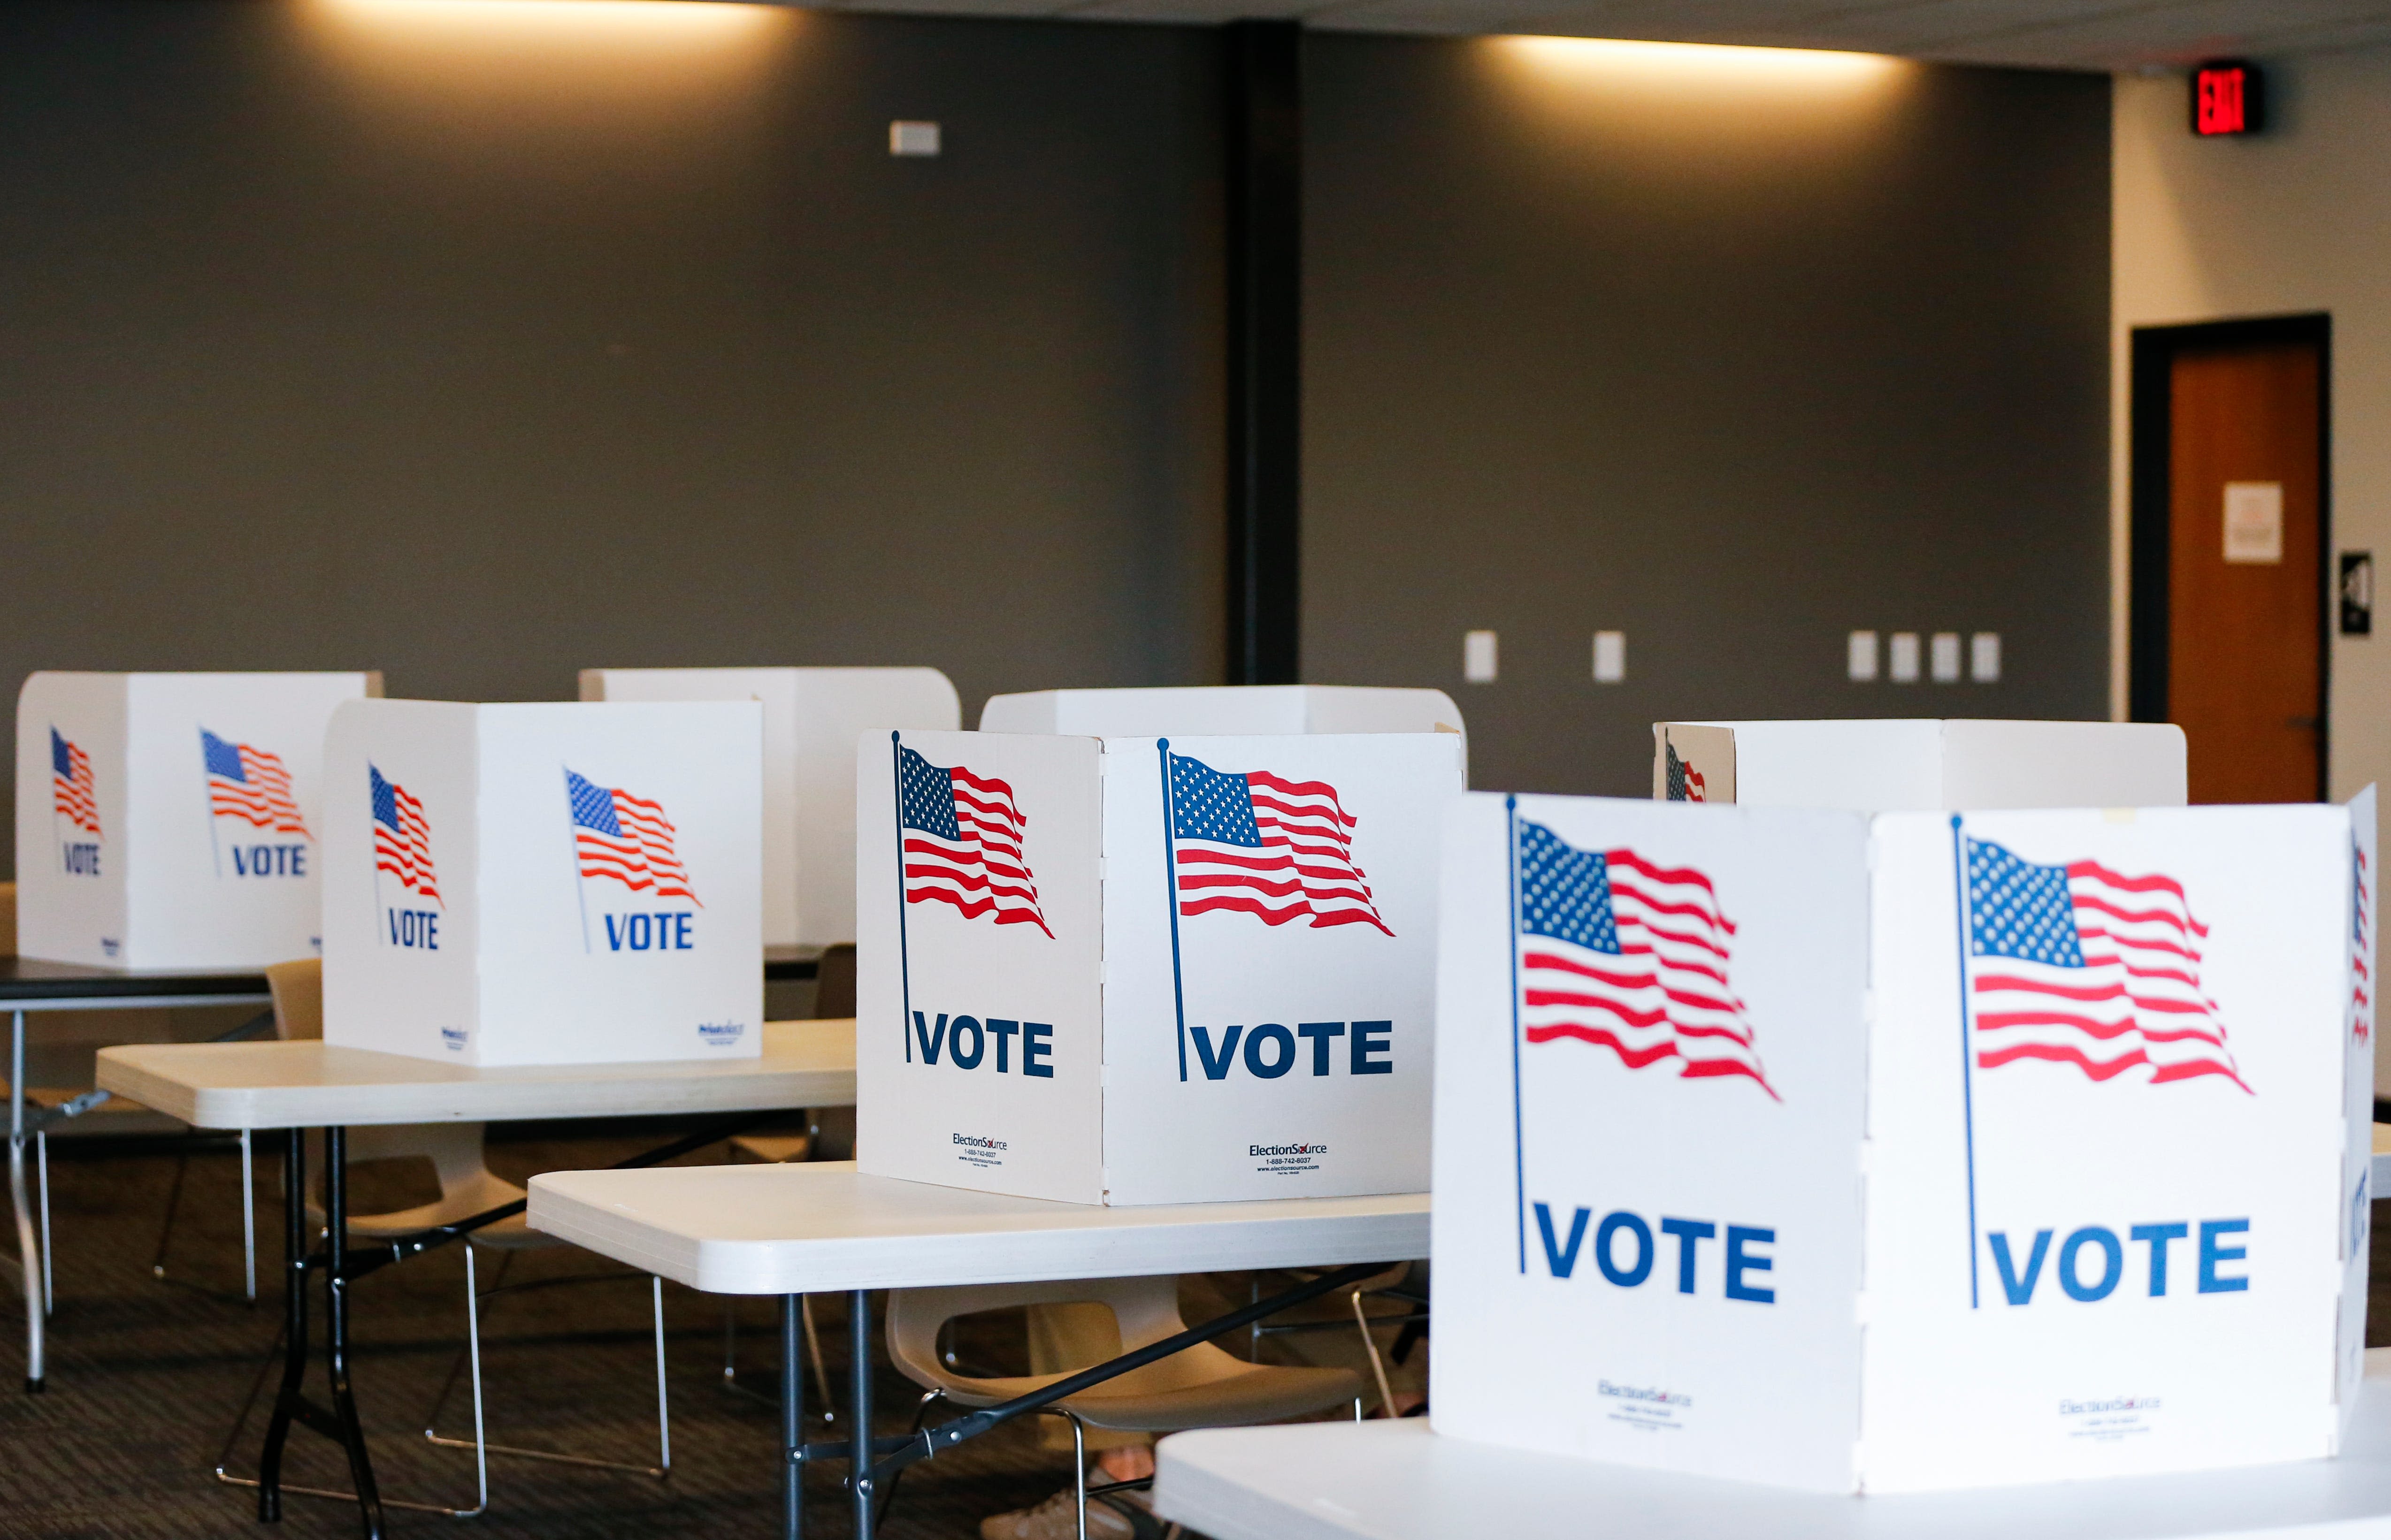 Missouri's primary election is Tuesday. Here's what to know about ballots, predictions